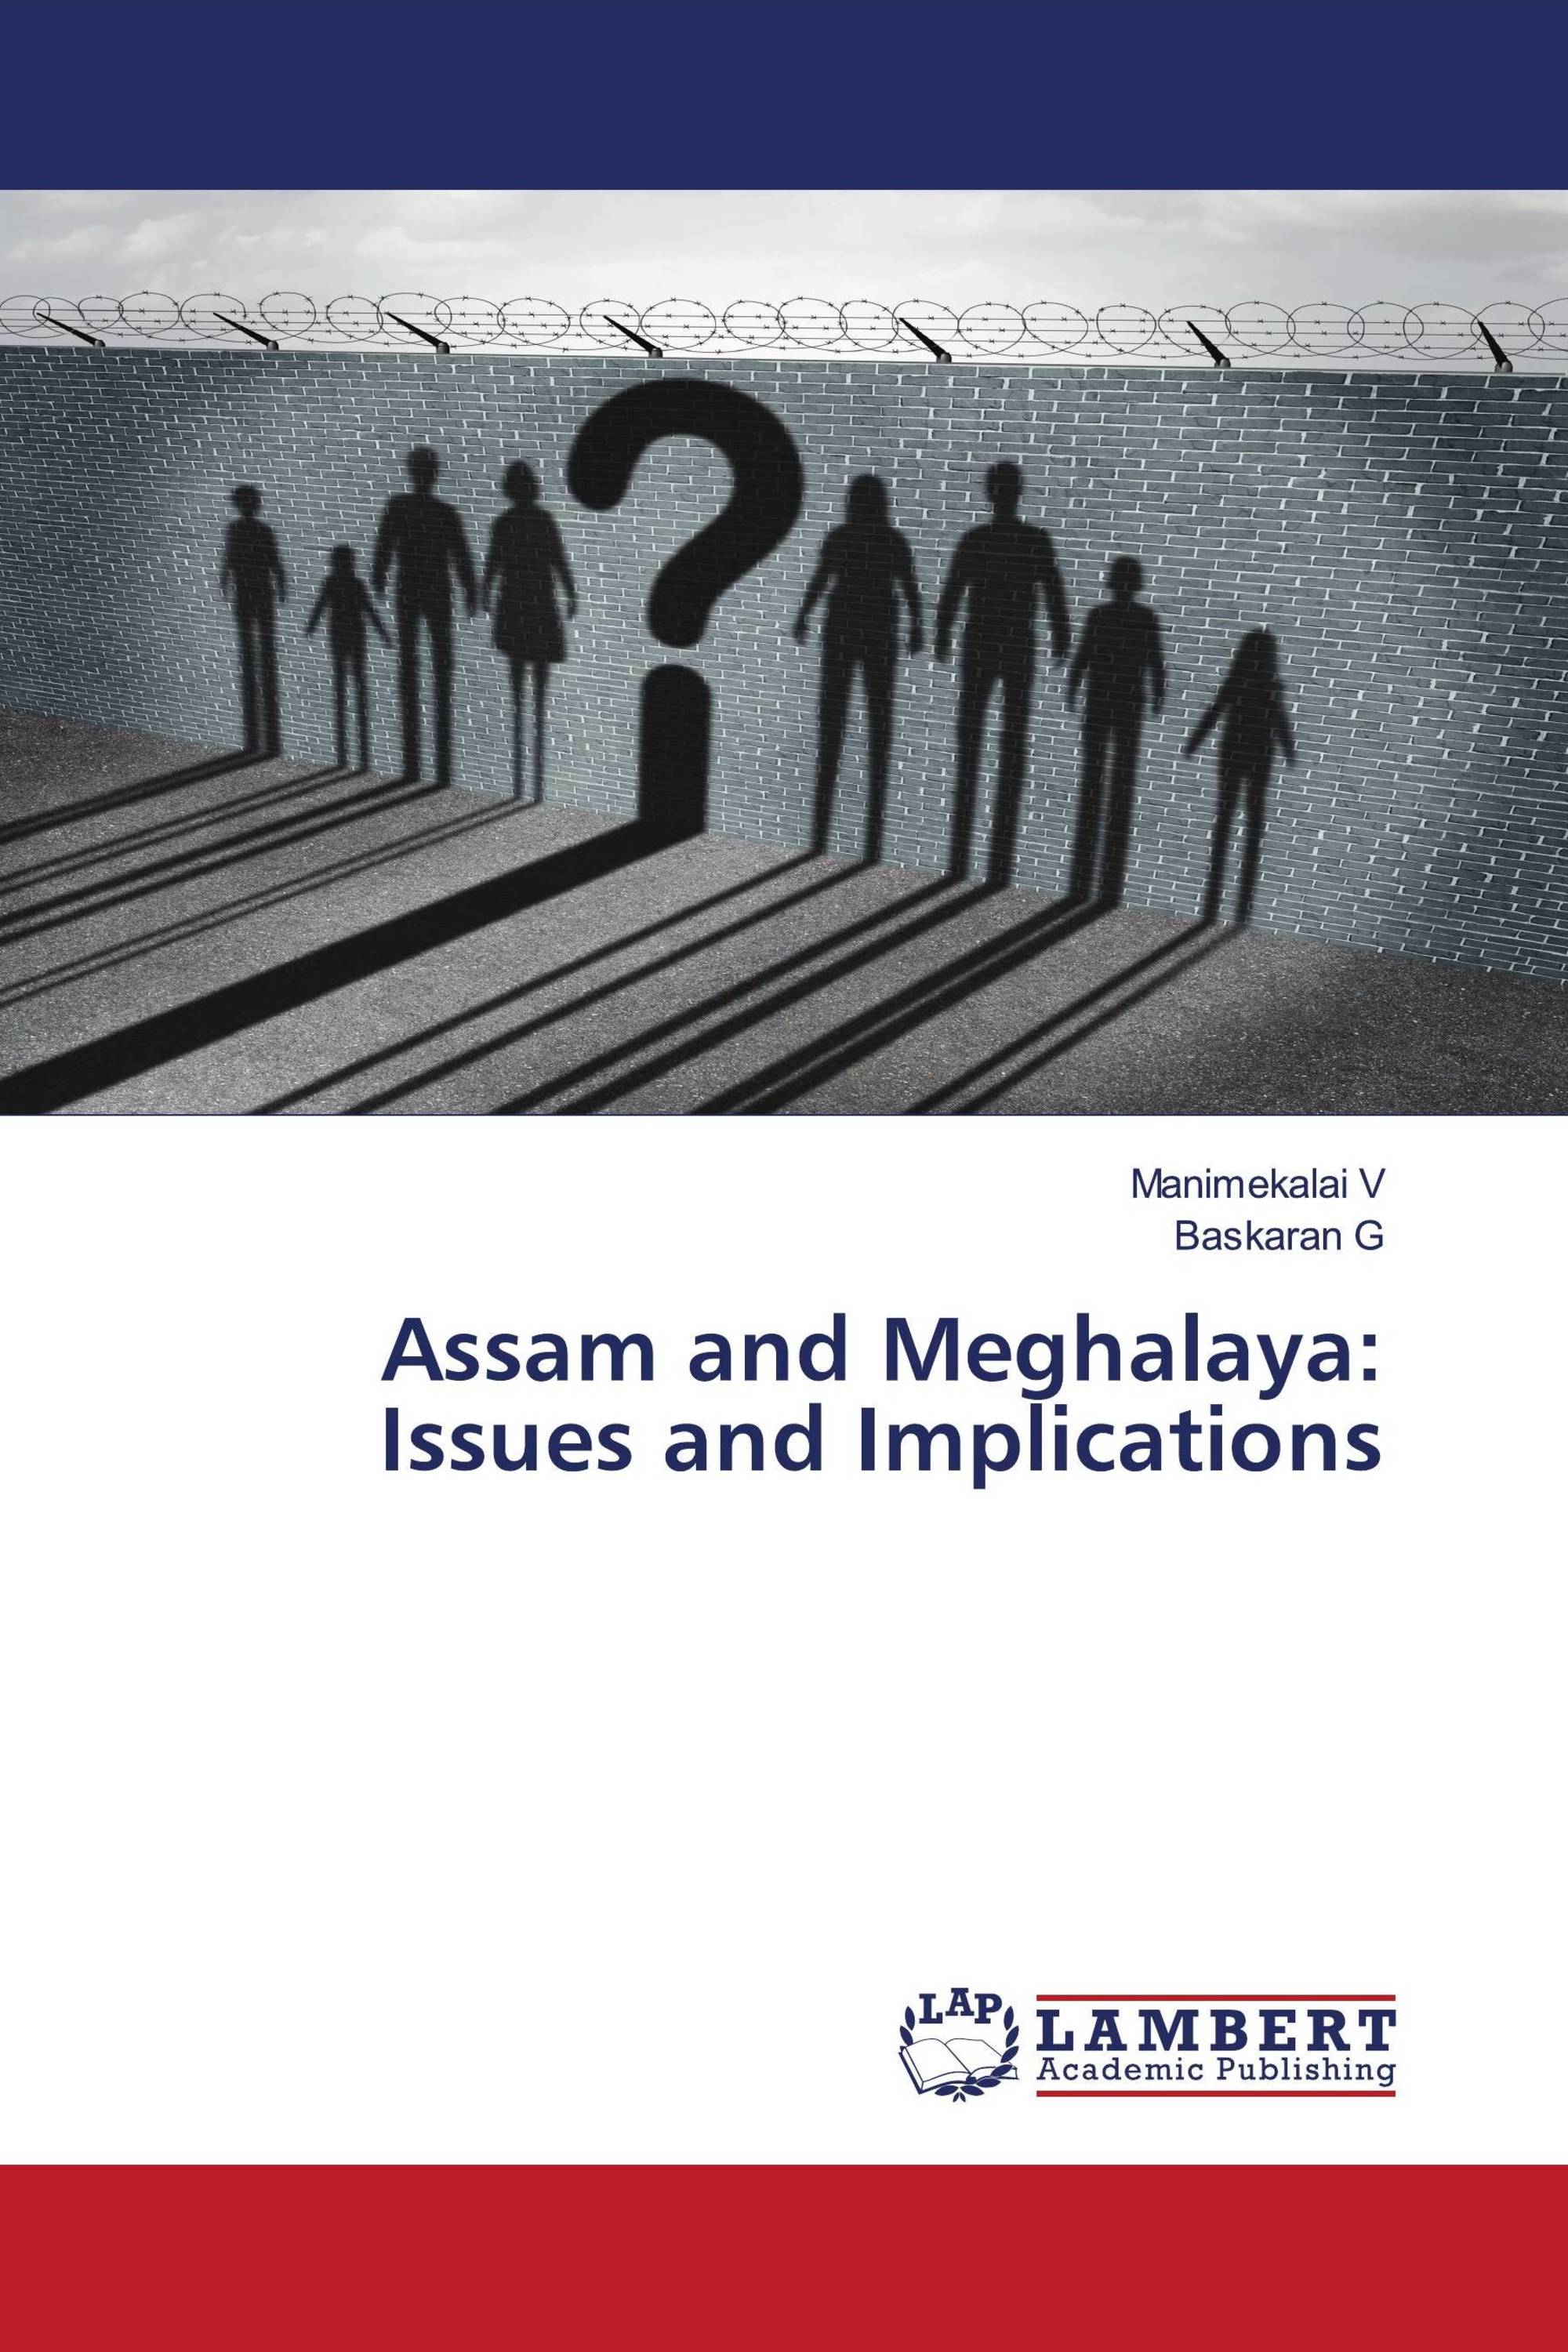 Assam and Meghalaya: Issues and Implications